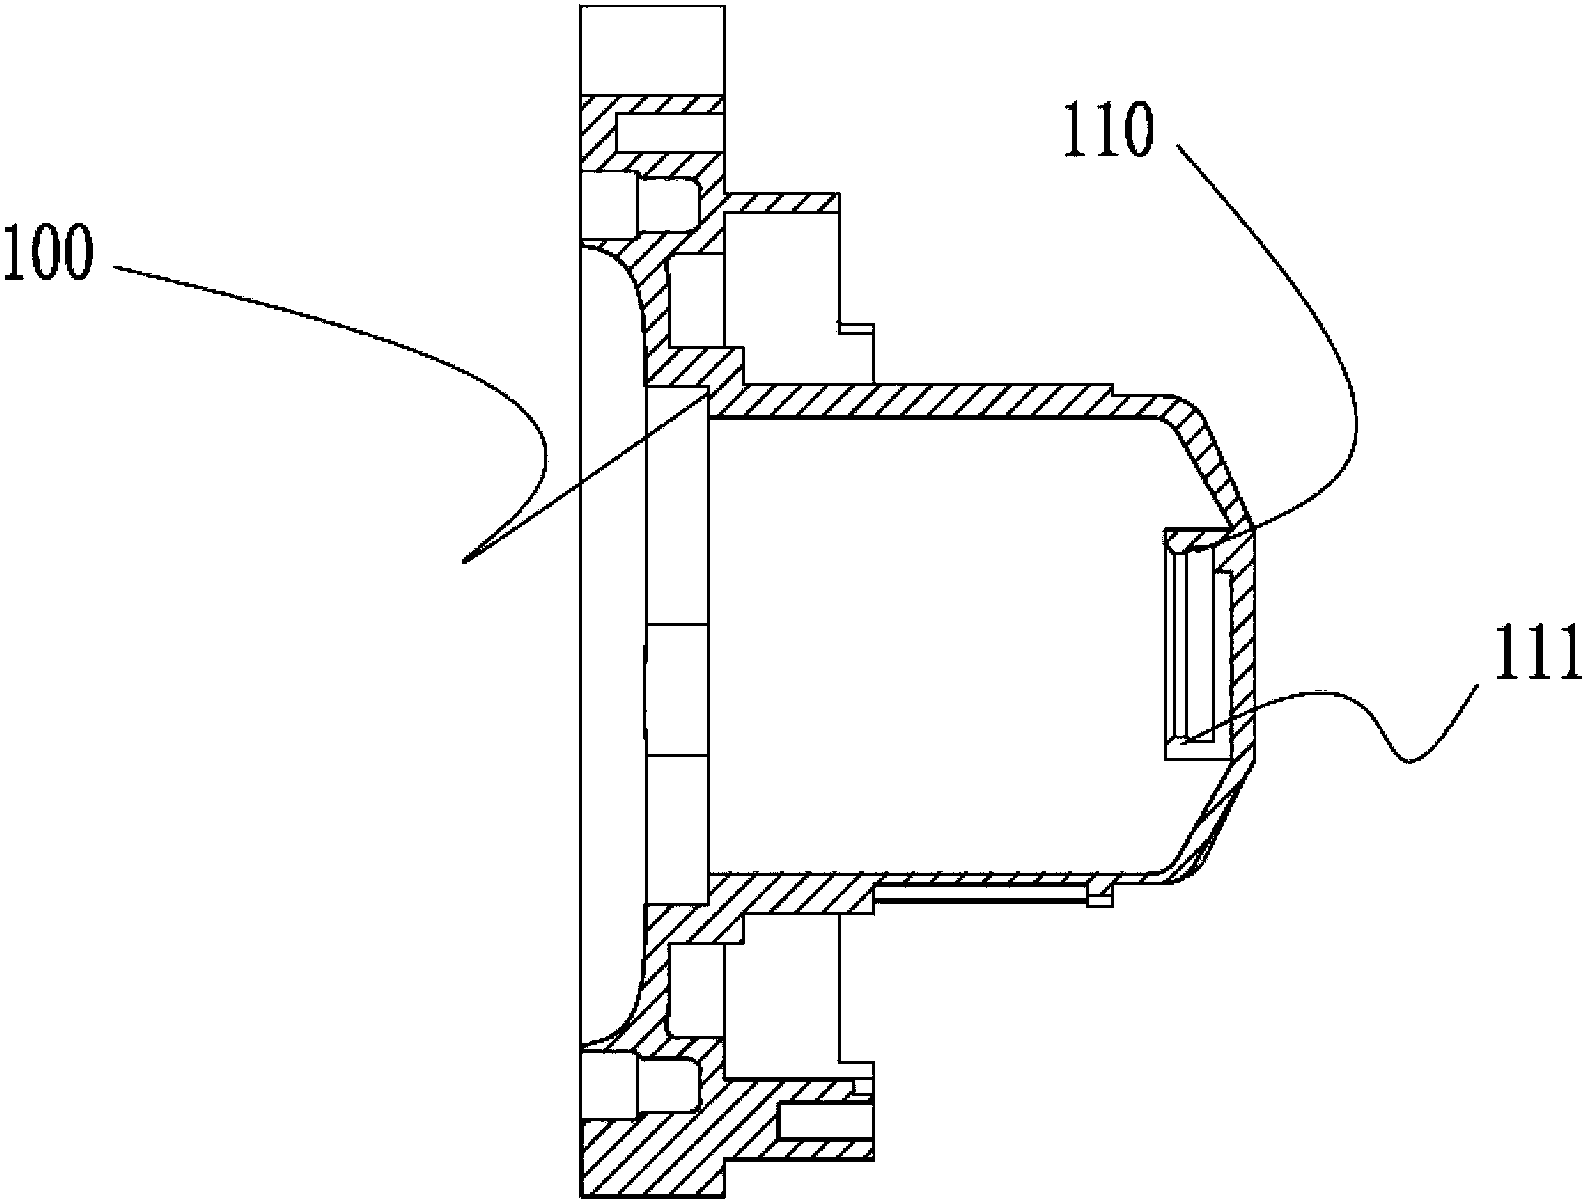 Motor bearing lubricating structure and motor for wet operating pump